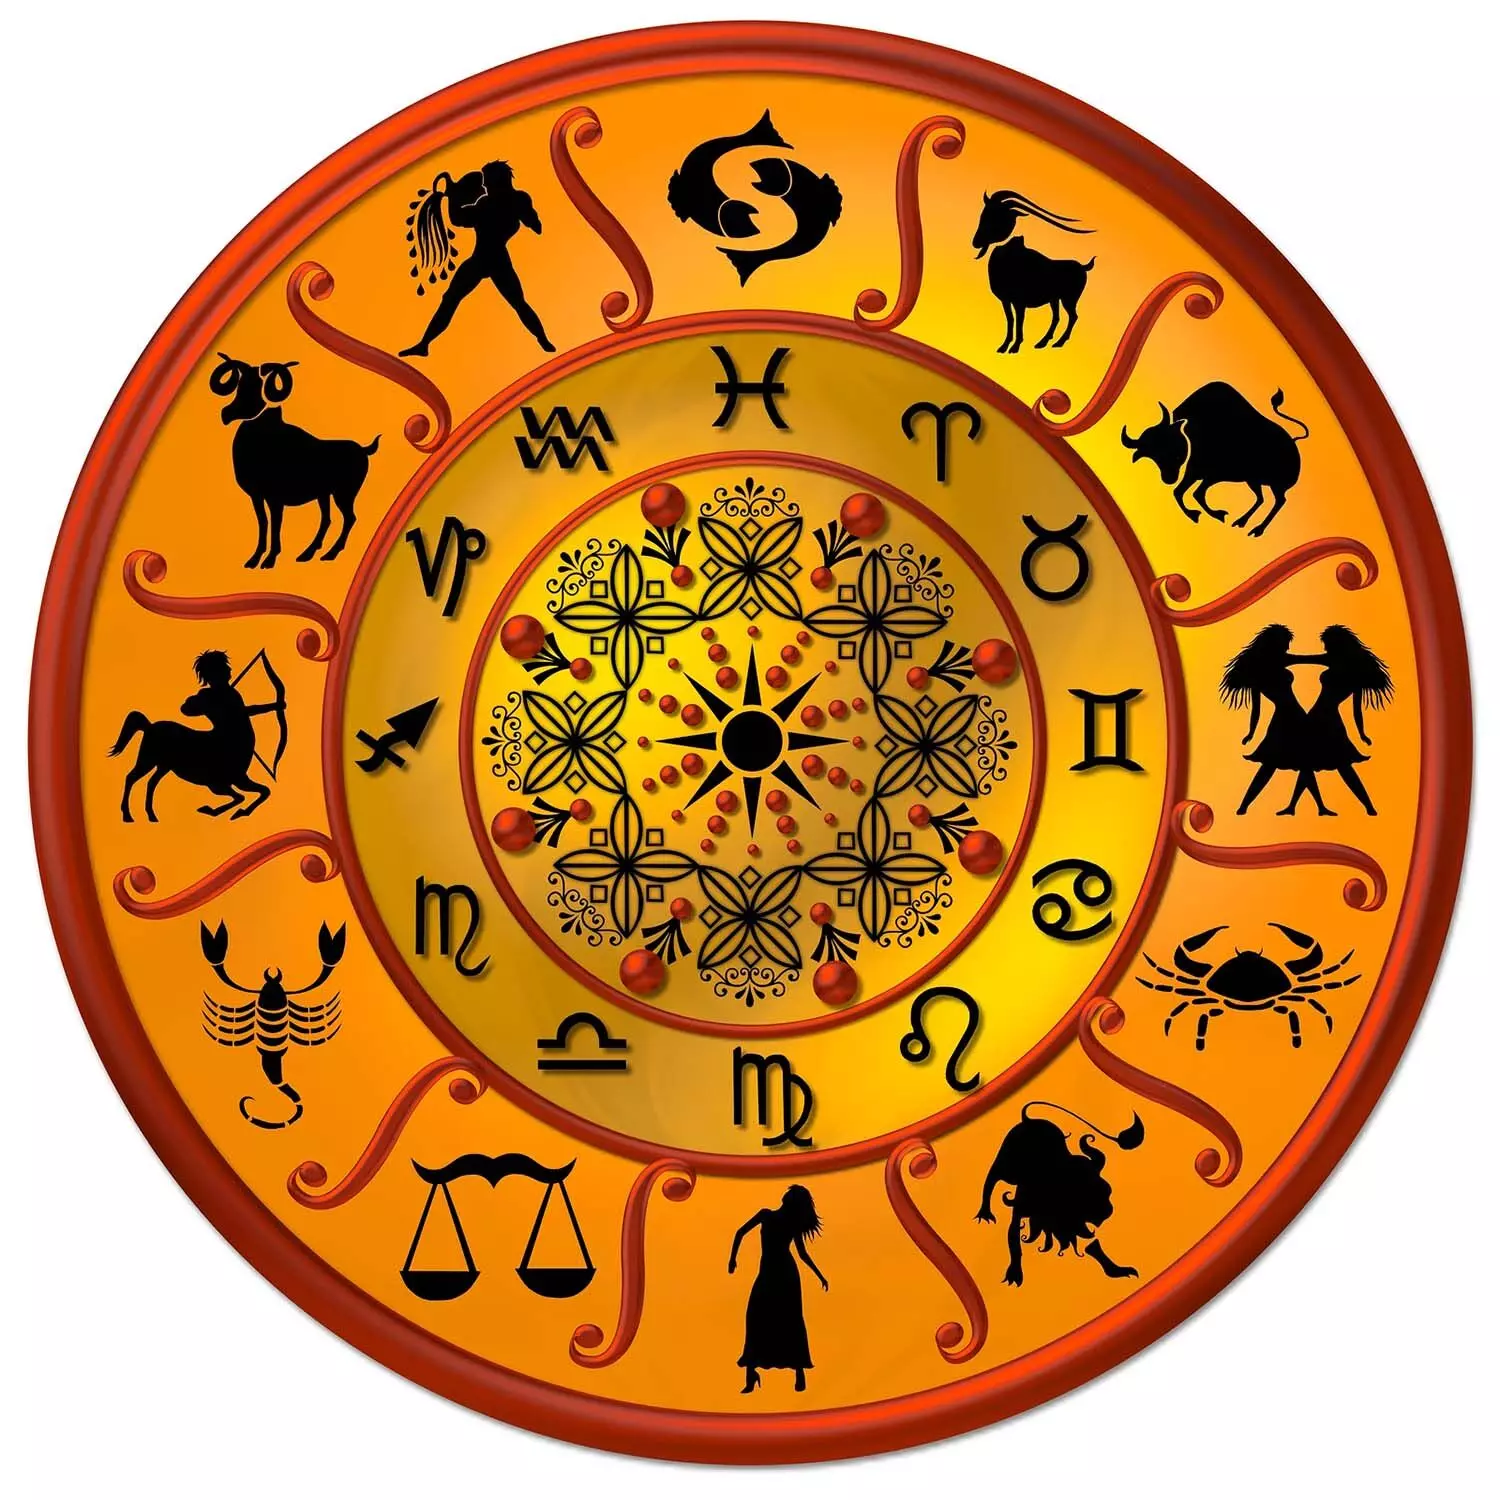 06 July – Know your todays horoscope